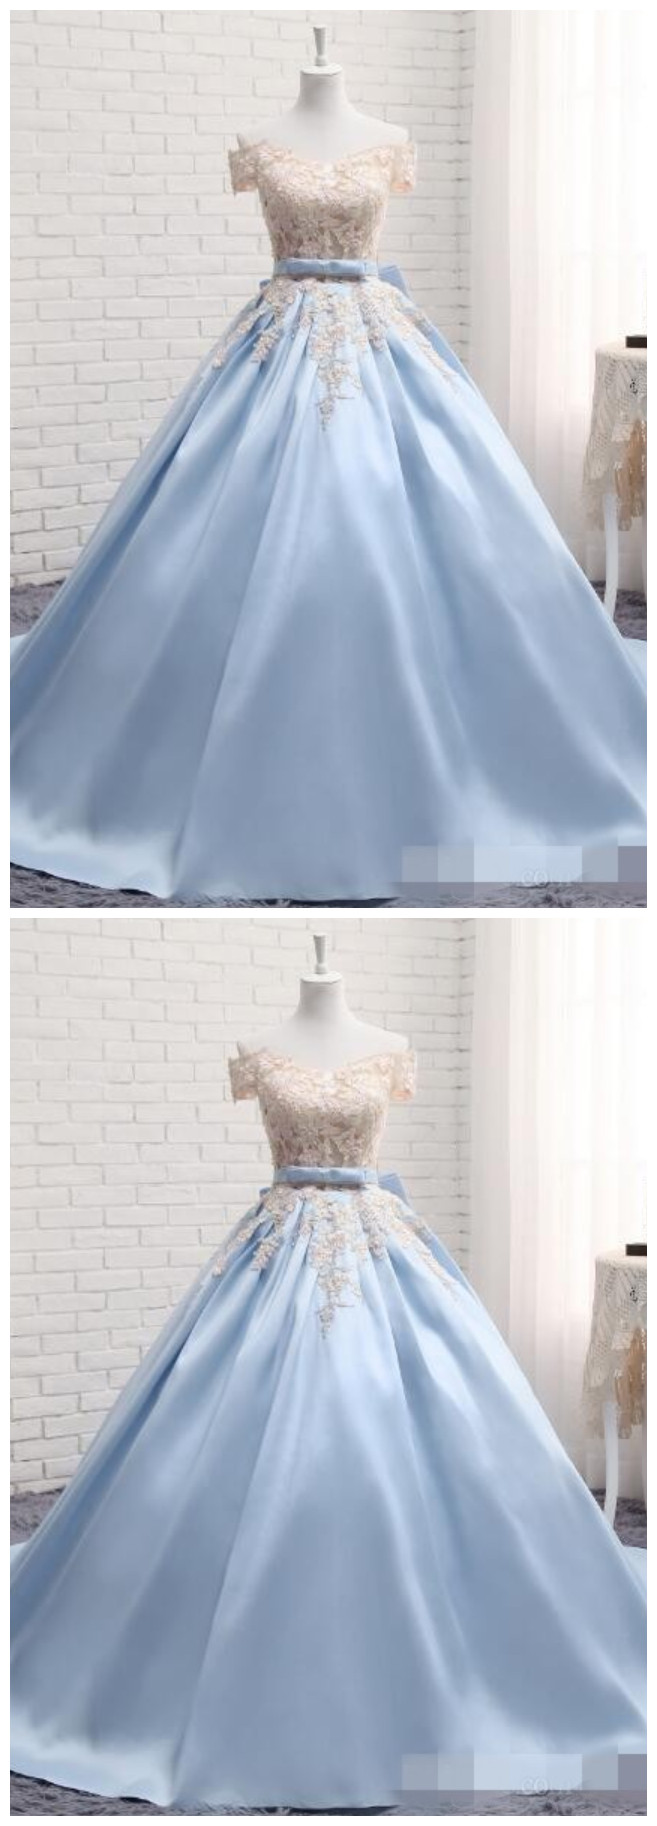 Baby Blue Off The Shoulder Sleeves Prom Dresses, Ball Gown Applique Prom Dress,pearls Bow Ribbon Sweet 16 Dress Evening Gowns